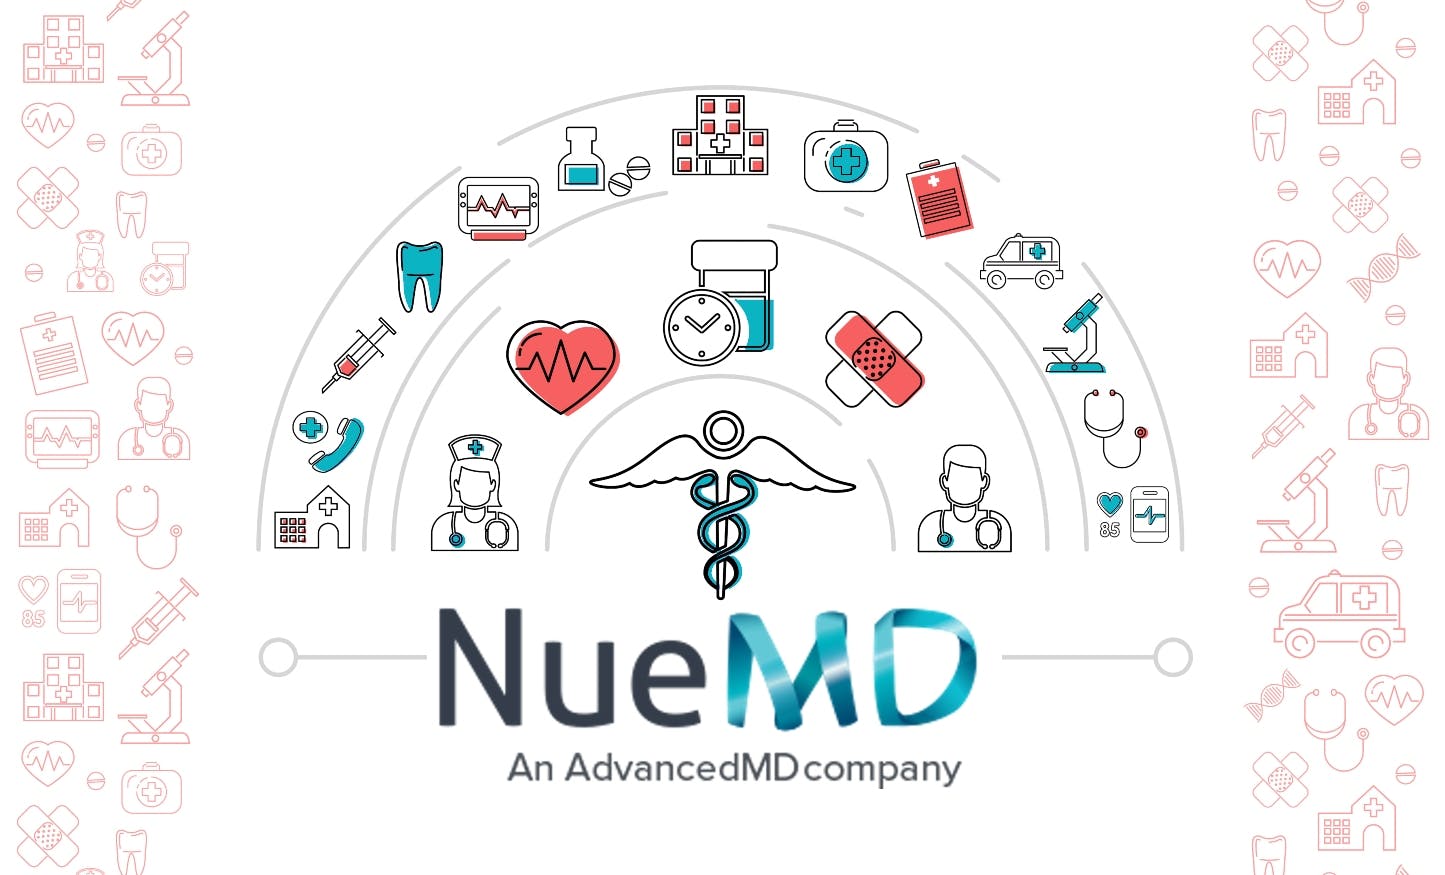 NueMD Software Review: Plans, Prices, Features, and More